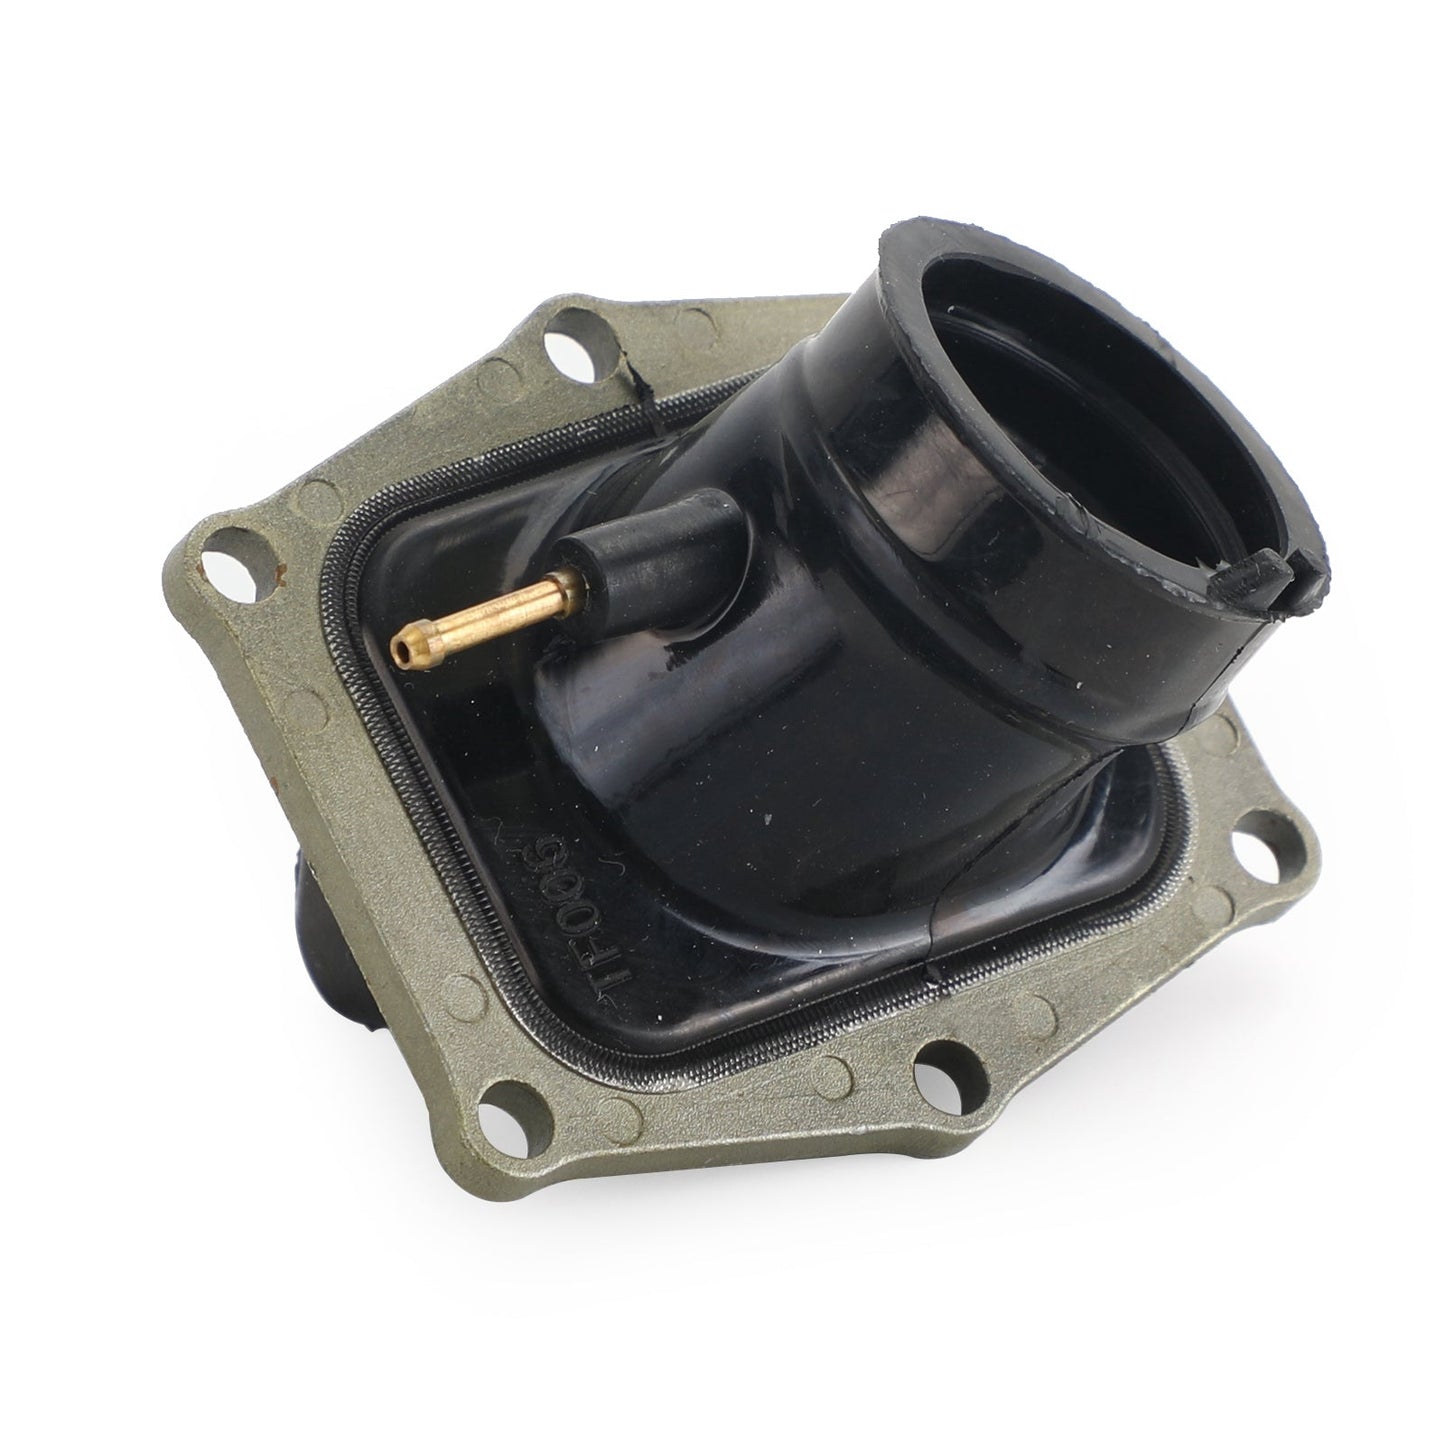 Intake Carb Joint Boot Insulator For Honda CRM250 CRM250R 93-94 16220-KAE-740